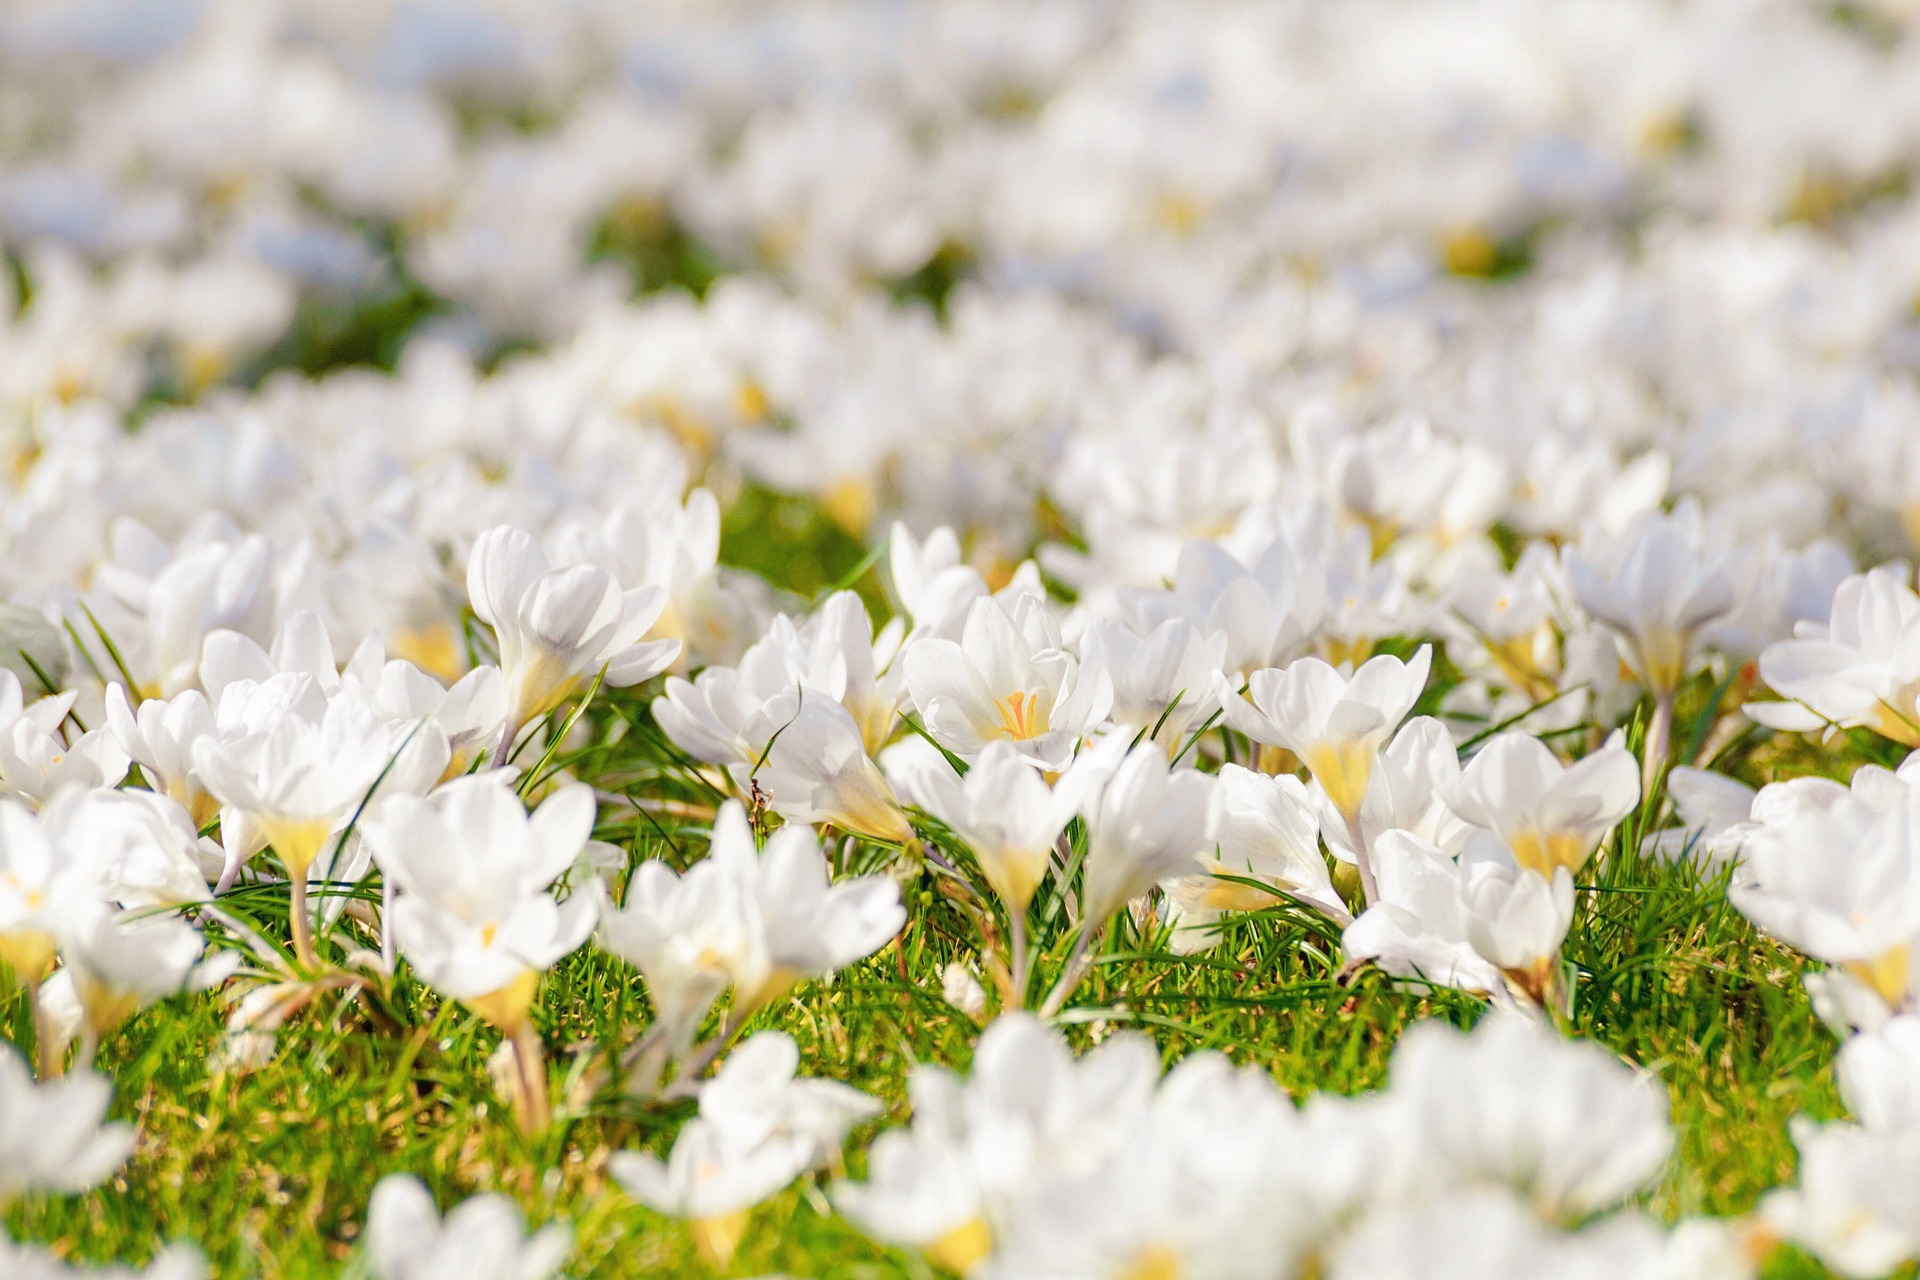 this image diplays a garden full of white crocuses.